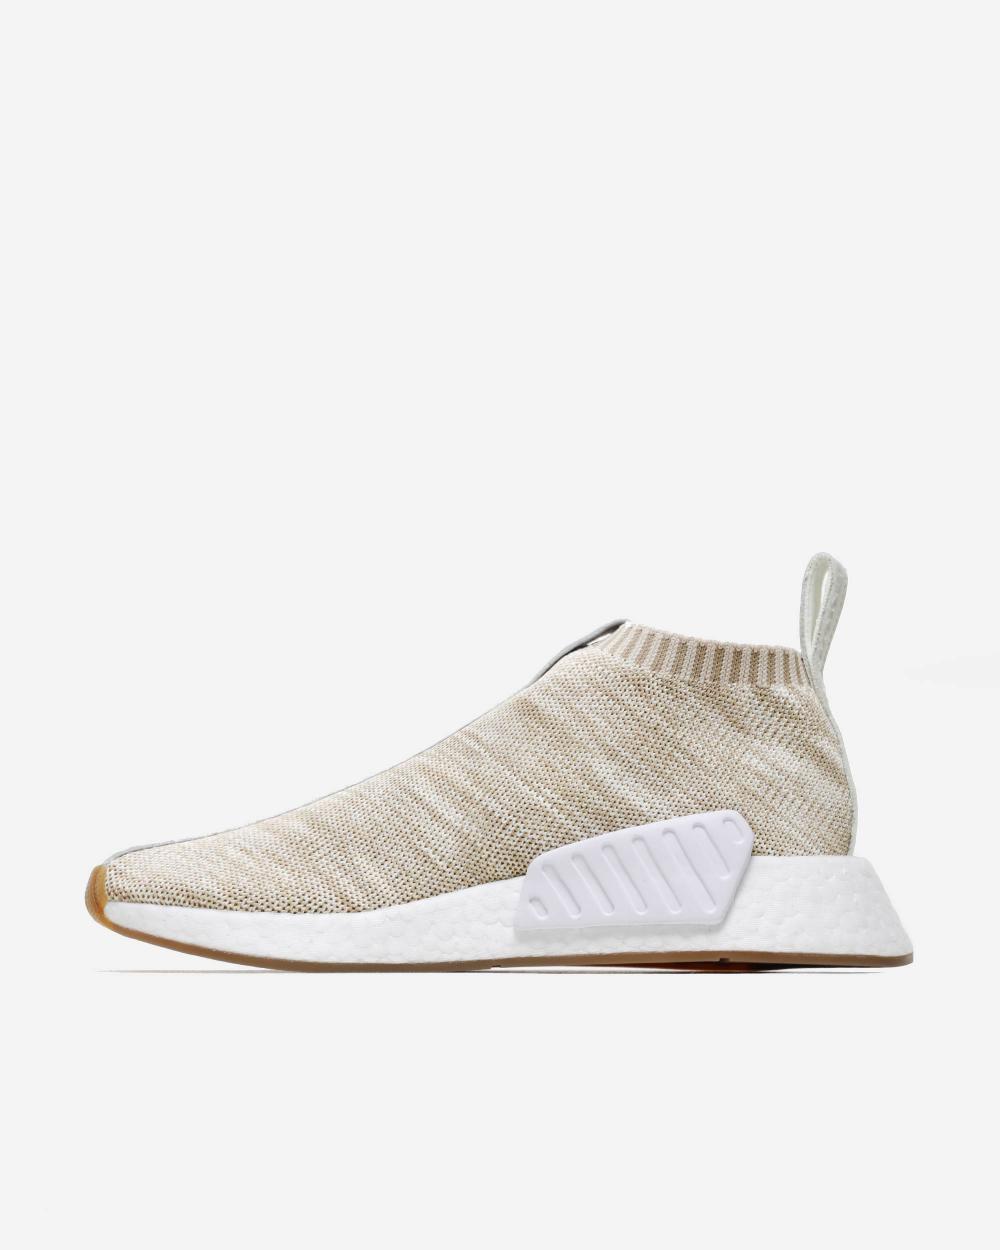 Ja klud En skønne dag The adidas NMD CS2 is Unveiled With a Kith x Naked Collaboration -  WearTesters